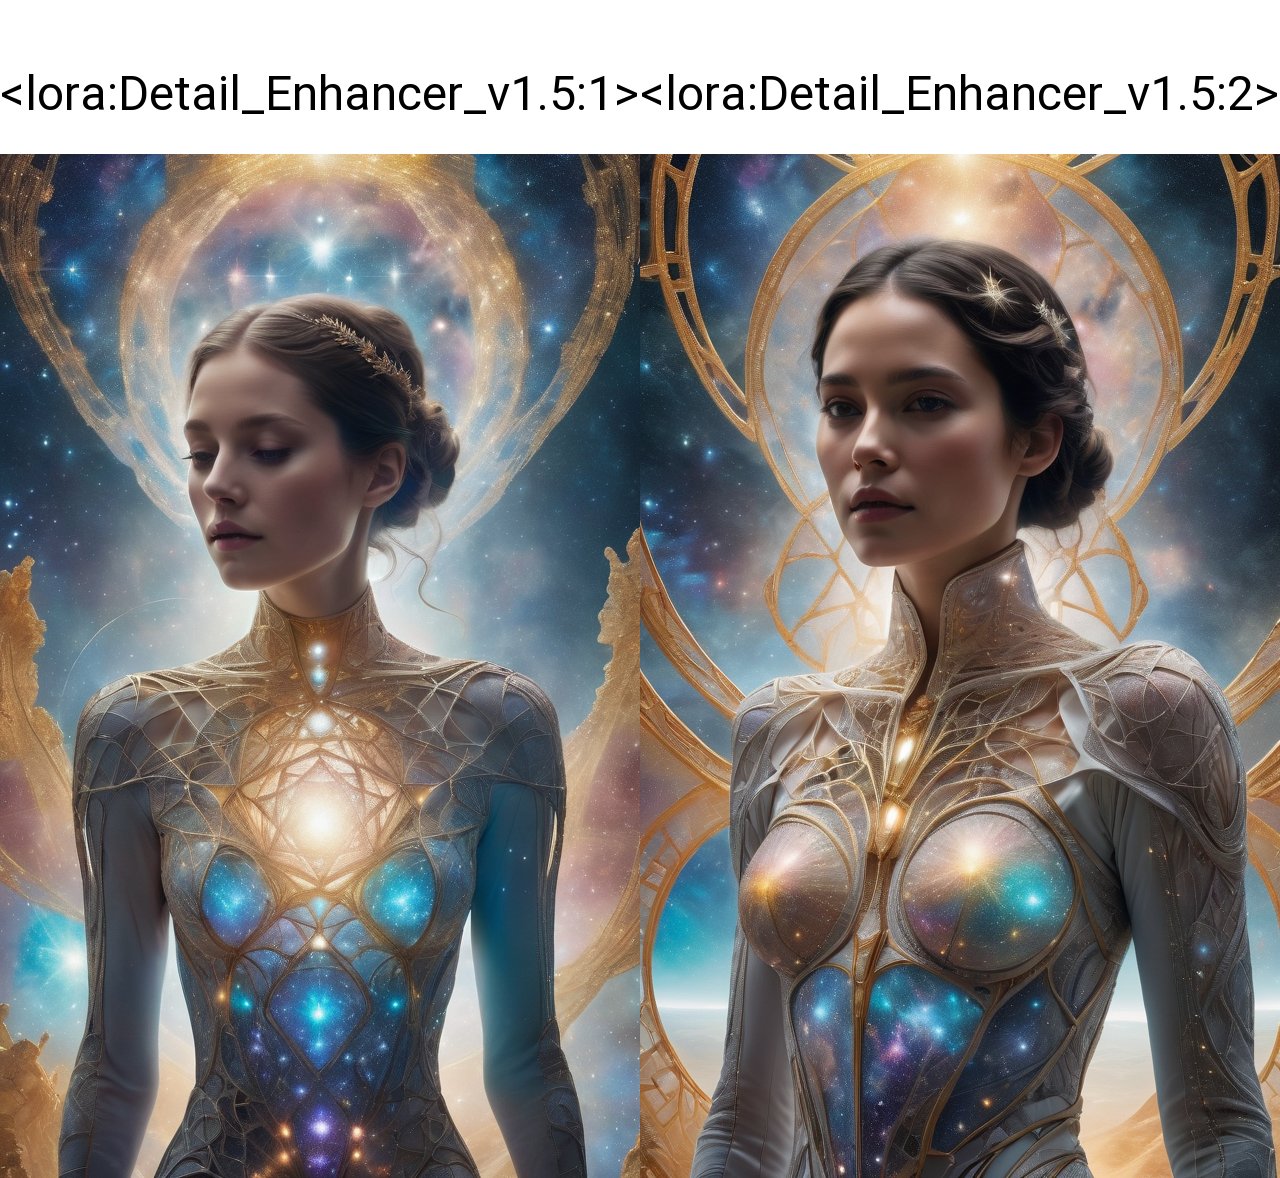 (best quality,8K,highres,masterpiece), ultra-detailed, featuring a woman with her face obscured by a grey square, set against a cosmic, star-filled background. The woman appears to be wearing or integrated with an intricate skeletal structure that is white and somewhat luminescent. The cosmic backdrop bathes the scene in a mesmerizing array of stars and galaxies, creating a sense of vastness and wonder. The obscured face adds an air of mystery and intrigue, inviting viewers to ponder the hidden depths of the character's identity. Meanwhile, the intricate skeletal structure adds a touch of ethereal beauty and symbolism, hinting at themes of mortality, transformation, and the interconnectedness of all things. This artwork is a captivating exploration of the human form amidst the cosmic expanse, blending elements of mystery, beauty, and cosmic wonder. <lora:Detail_Enhancer_v1.5:1>